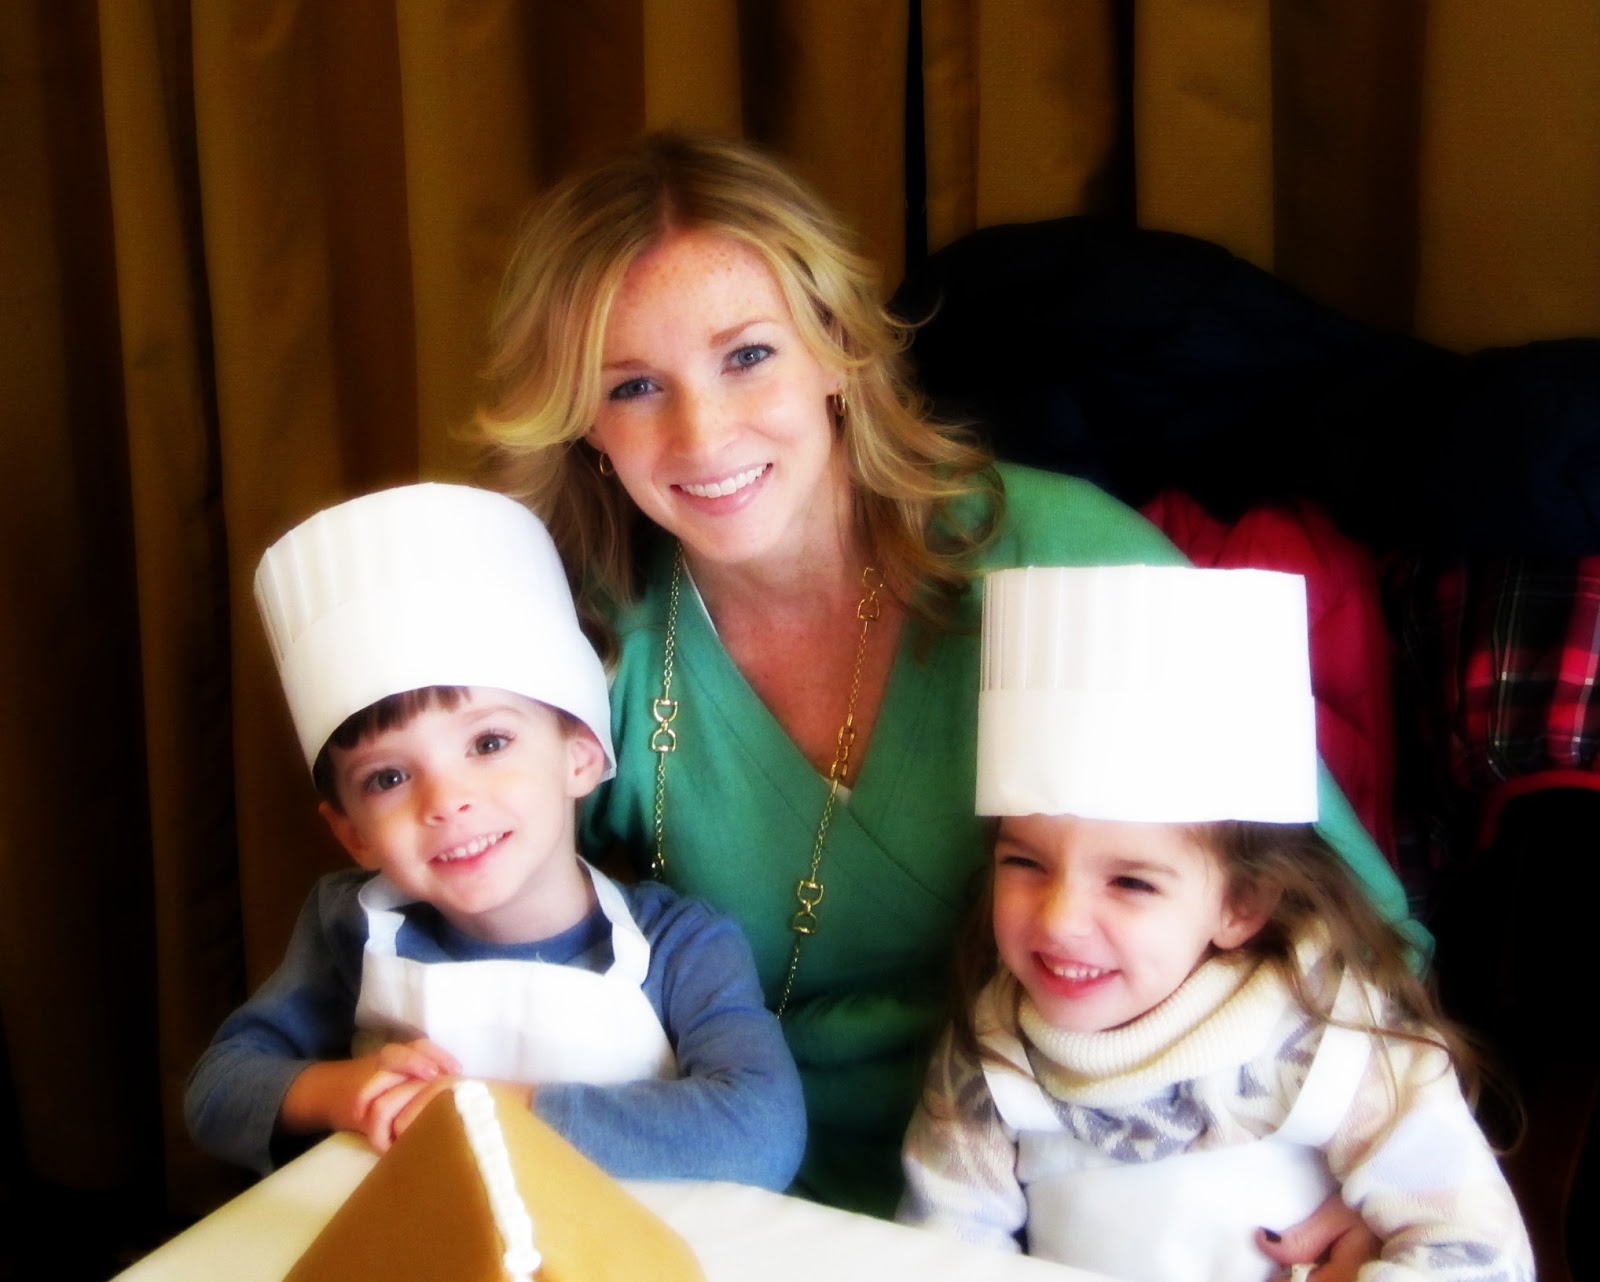 Cooking with kids, Crafts with kids, making gingerbread houses with kids, Boden, CWonder, gold necklace